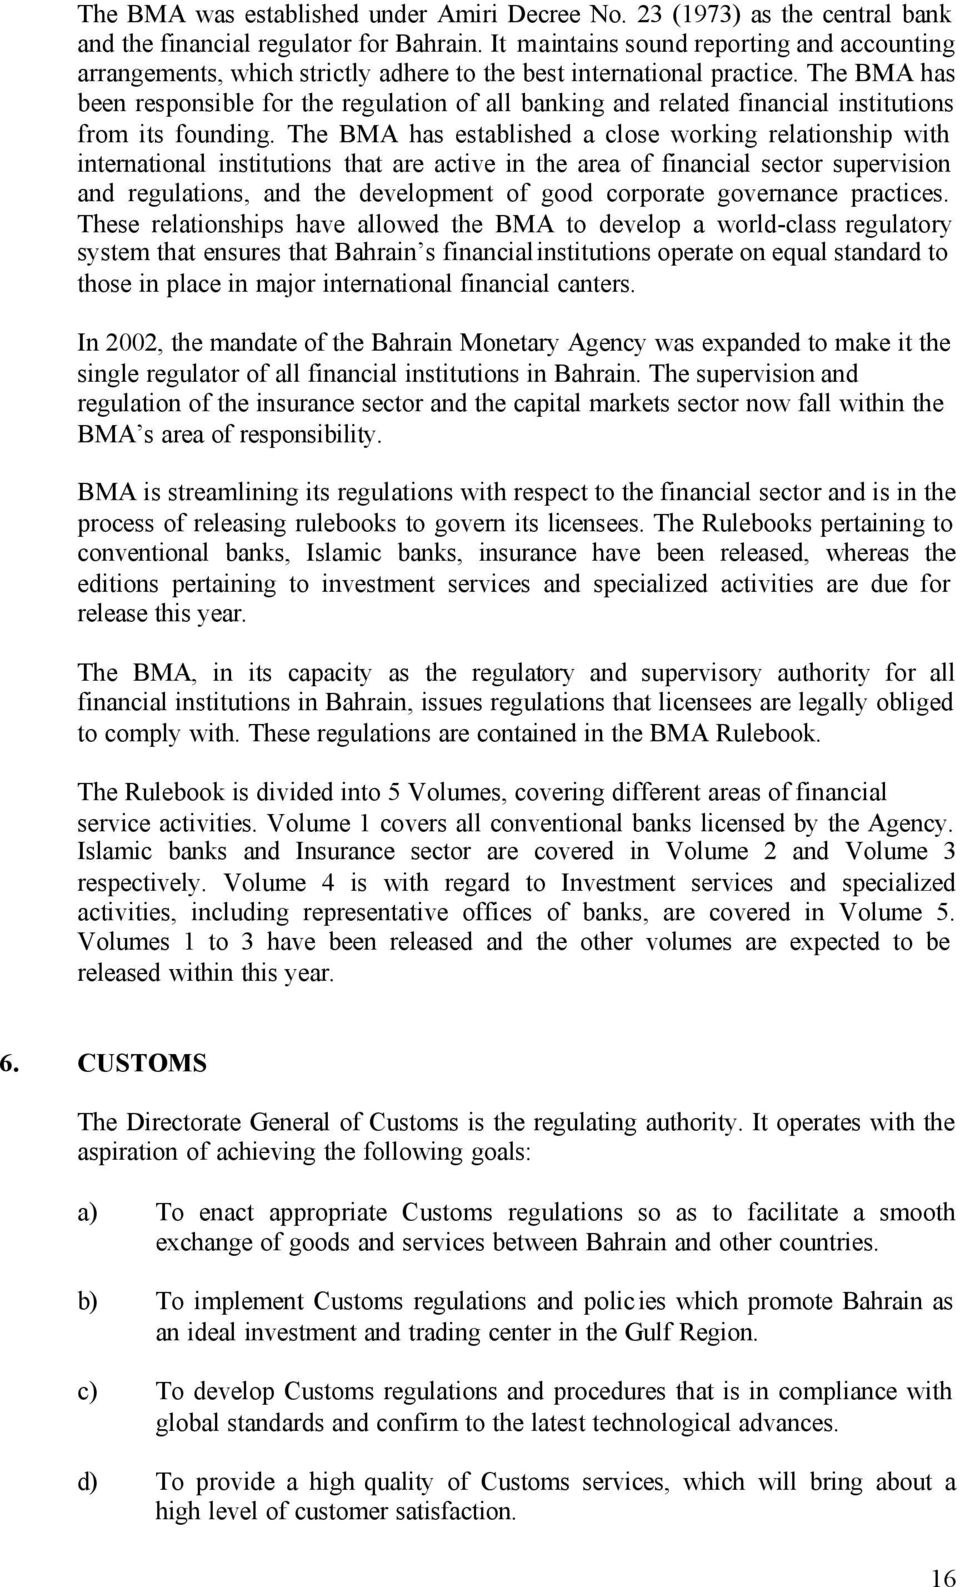 The BMA has been responsible for the regulation of all banking and related financial institutions from its founding.